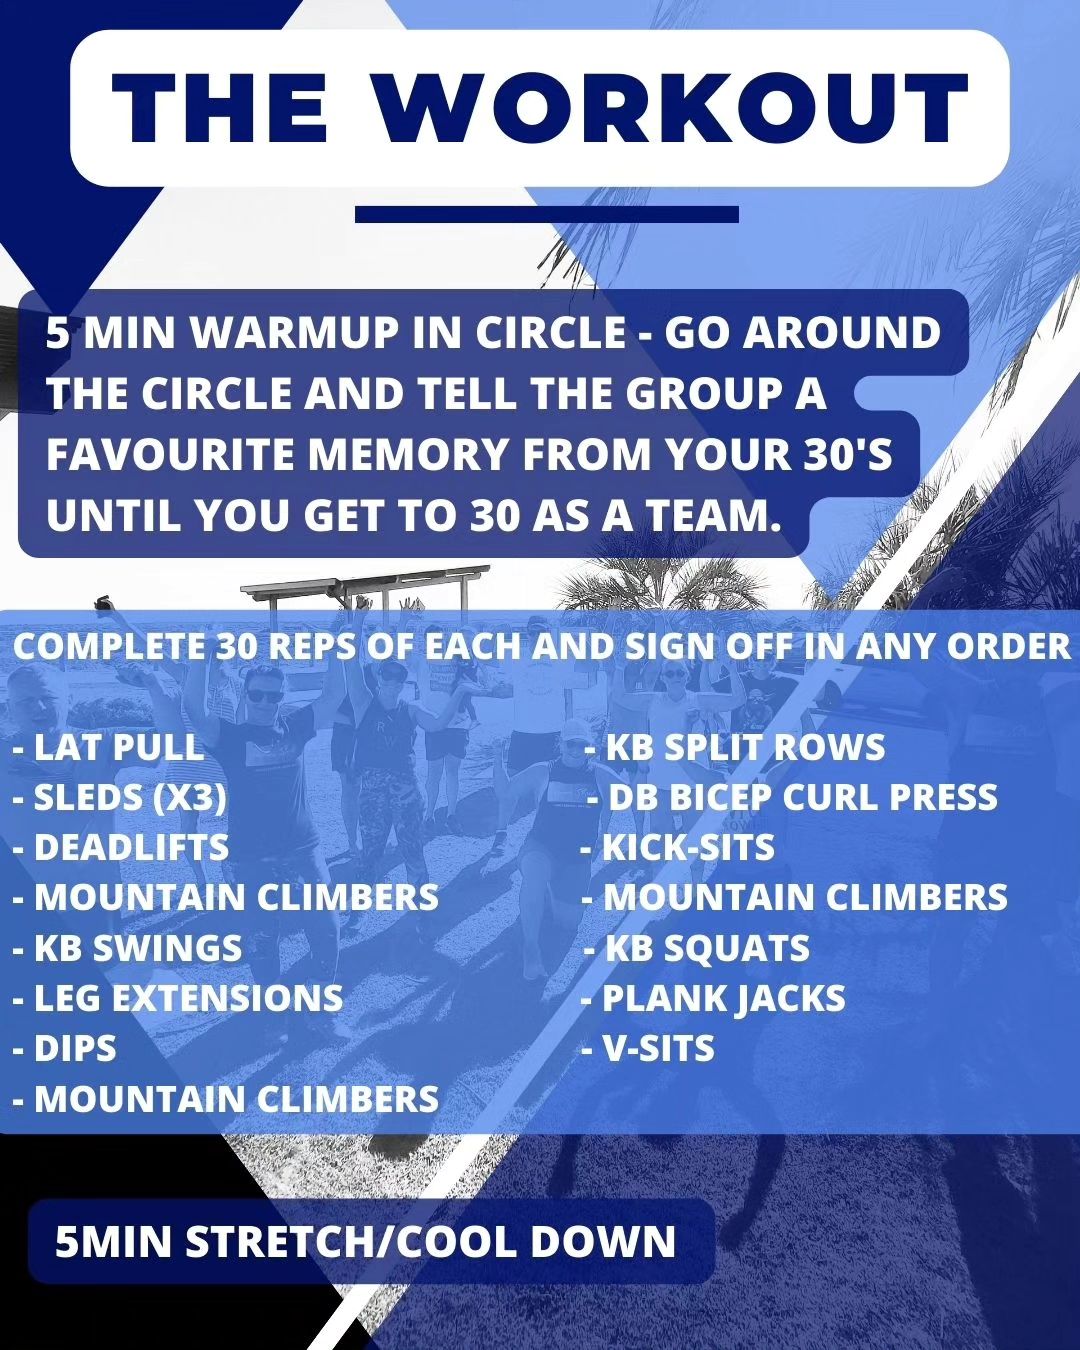  Dirty 30 Workout